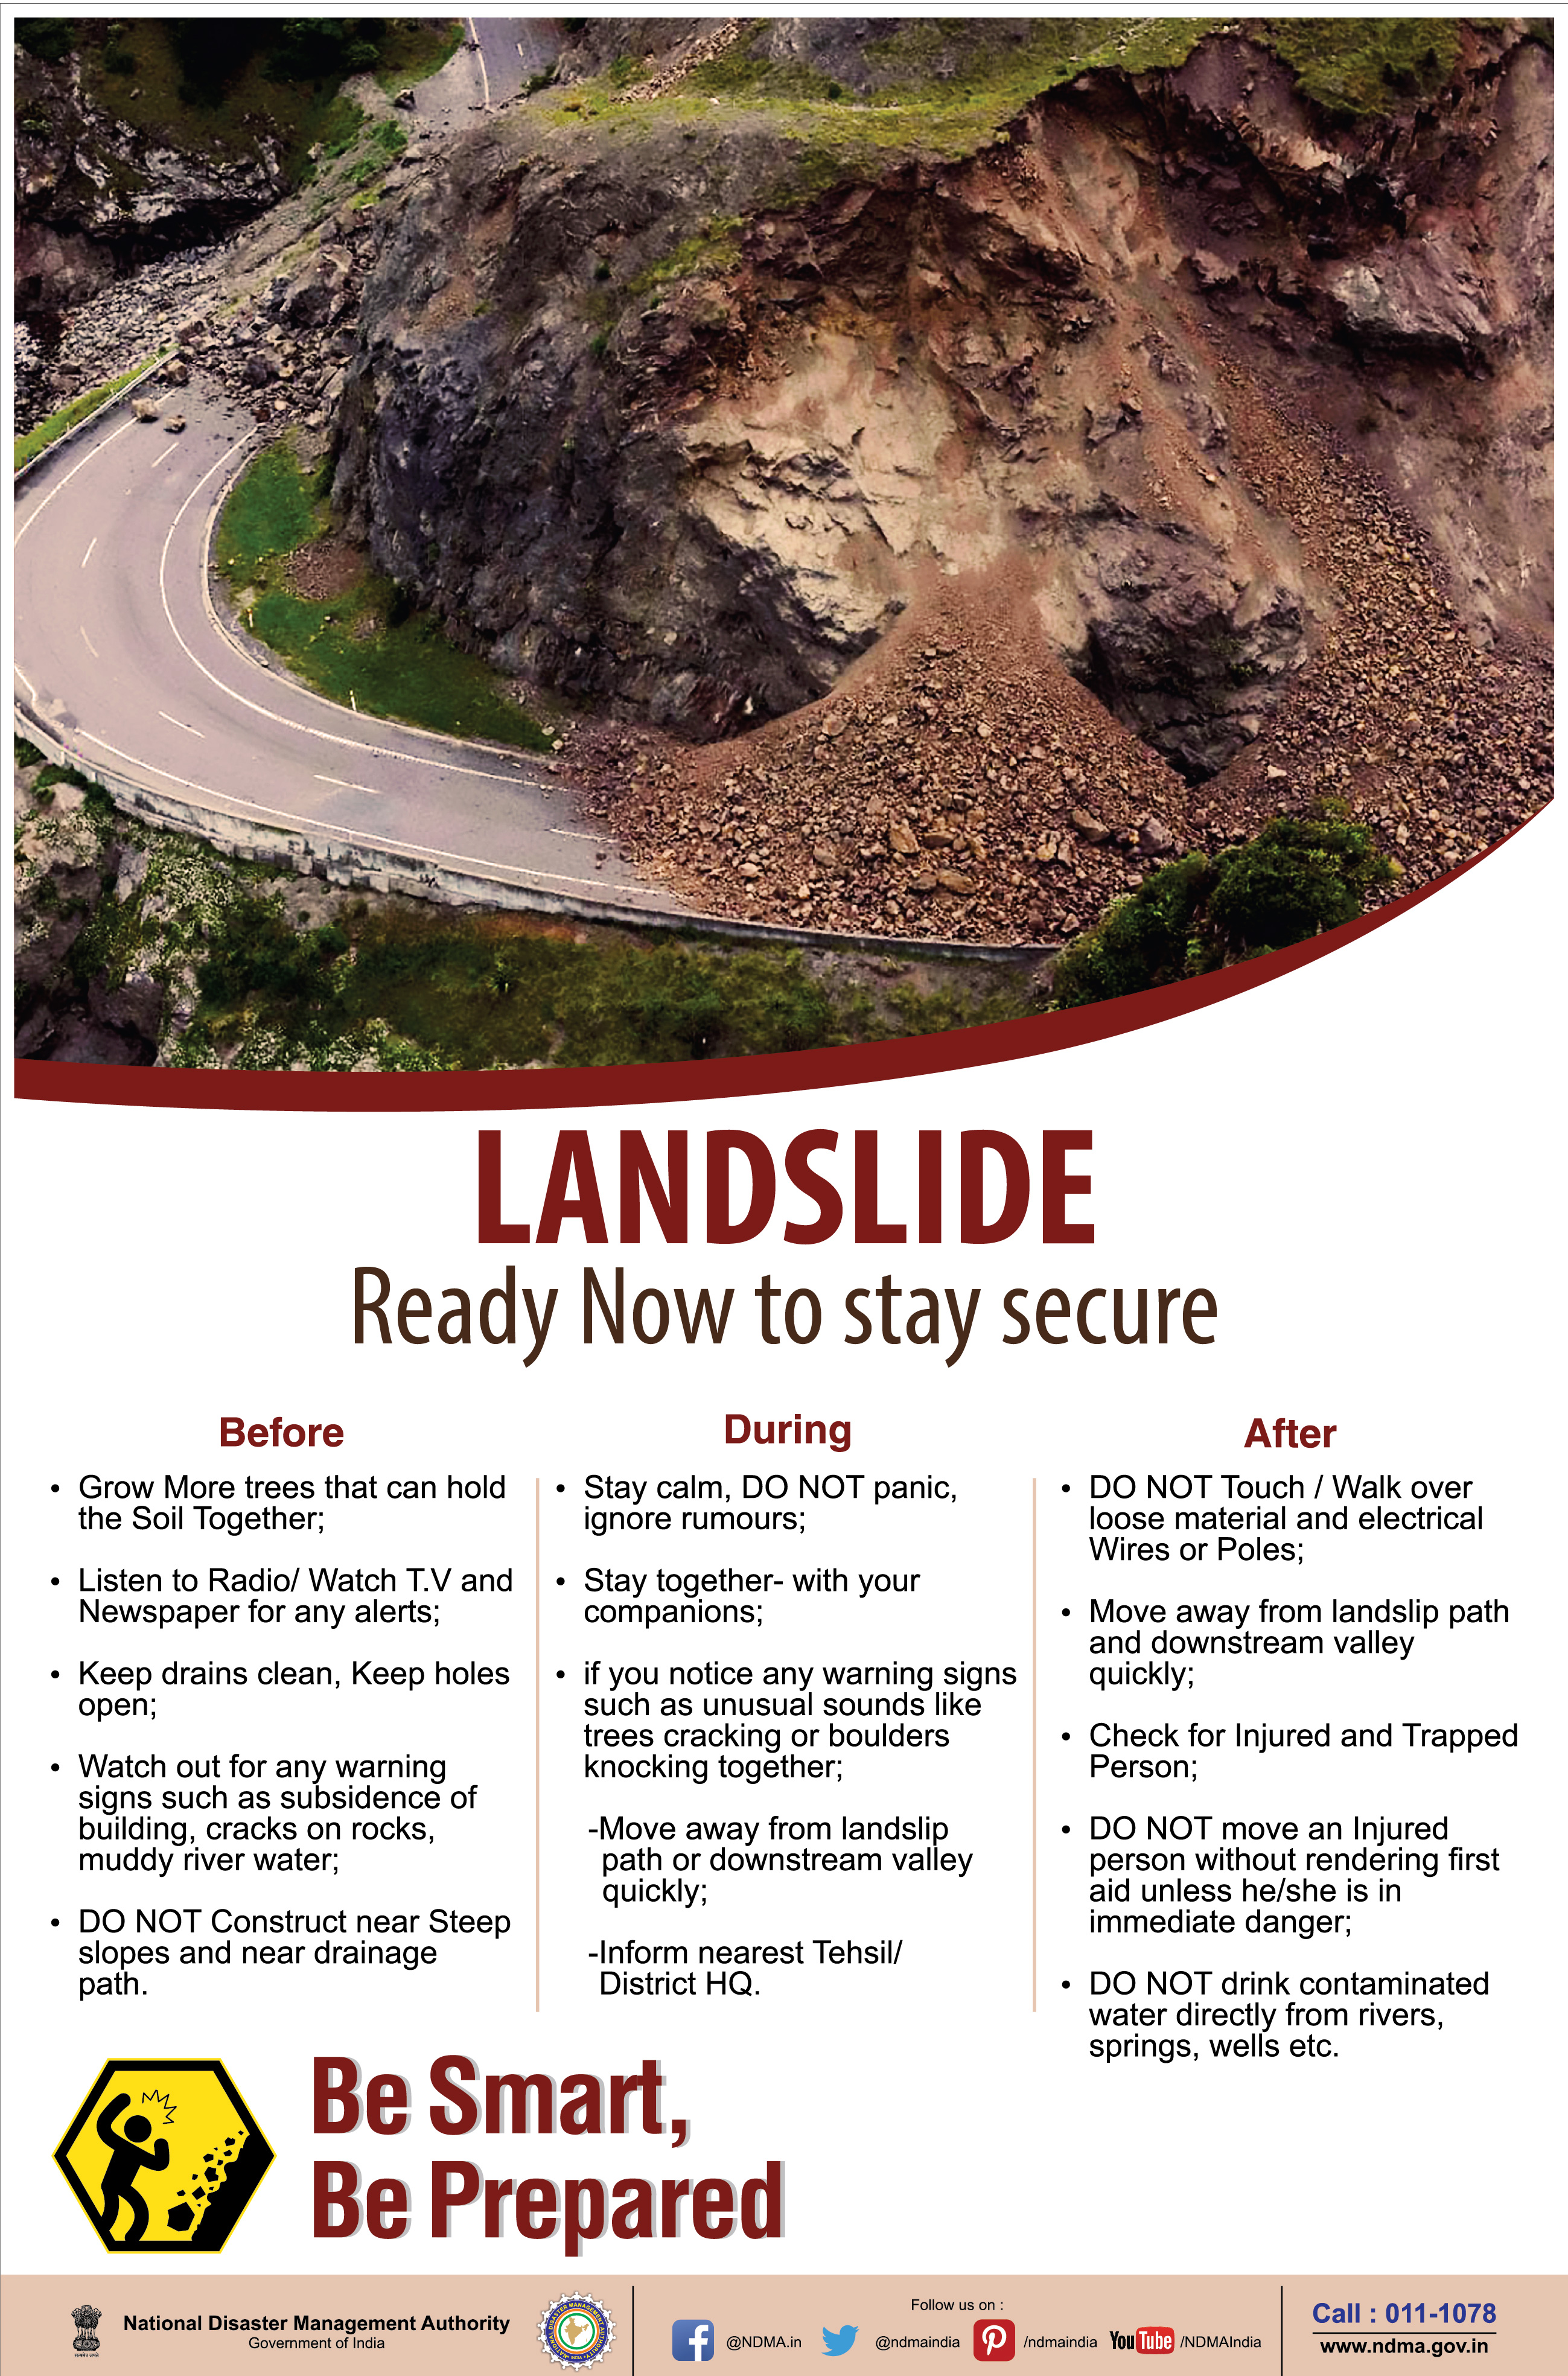 Landslide - ready now to stay secure 